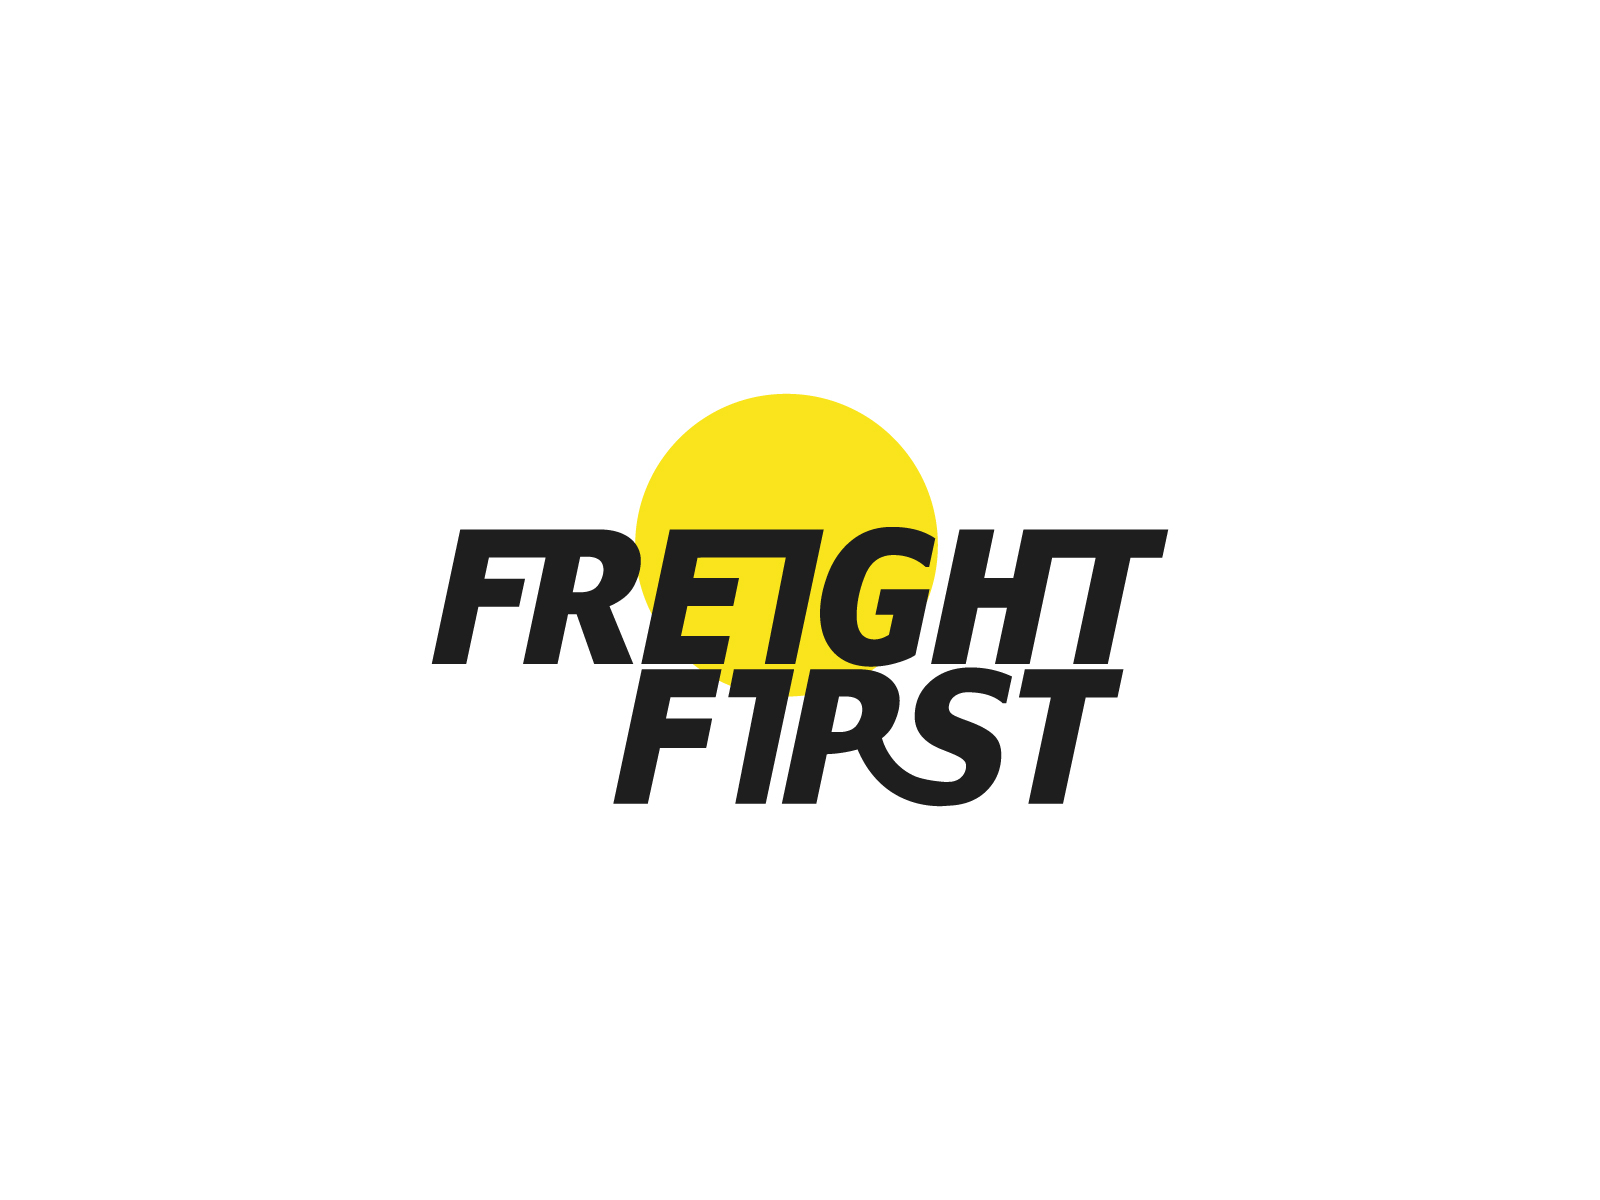 Freight First - 30 Day Logo Challenge by Serkan Kor on Dribbble